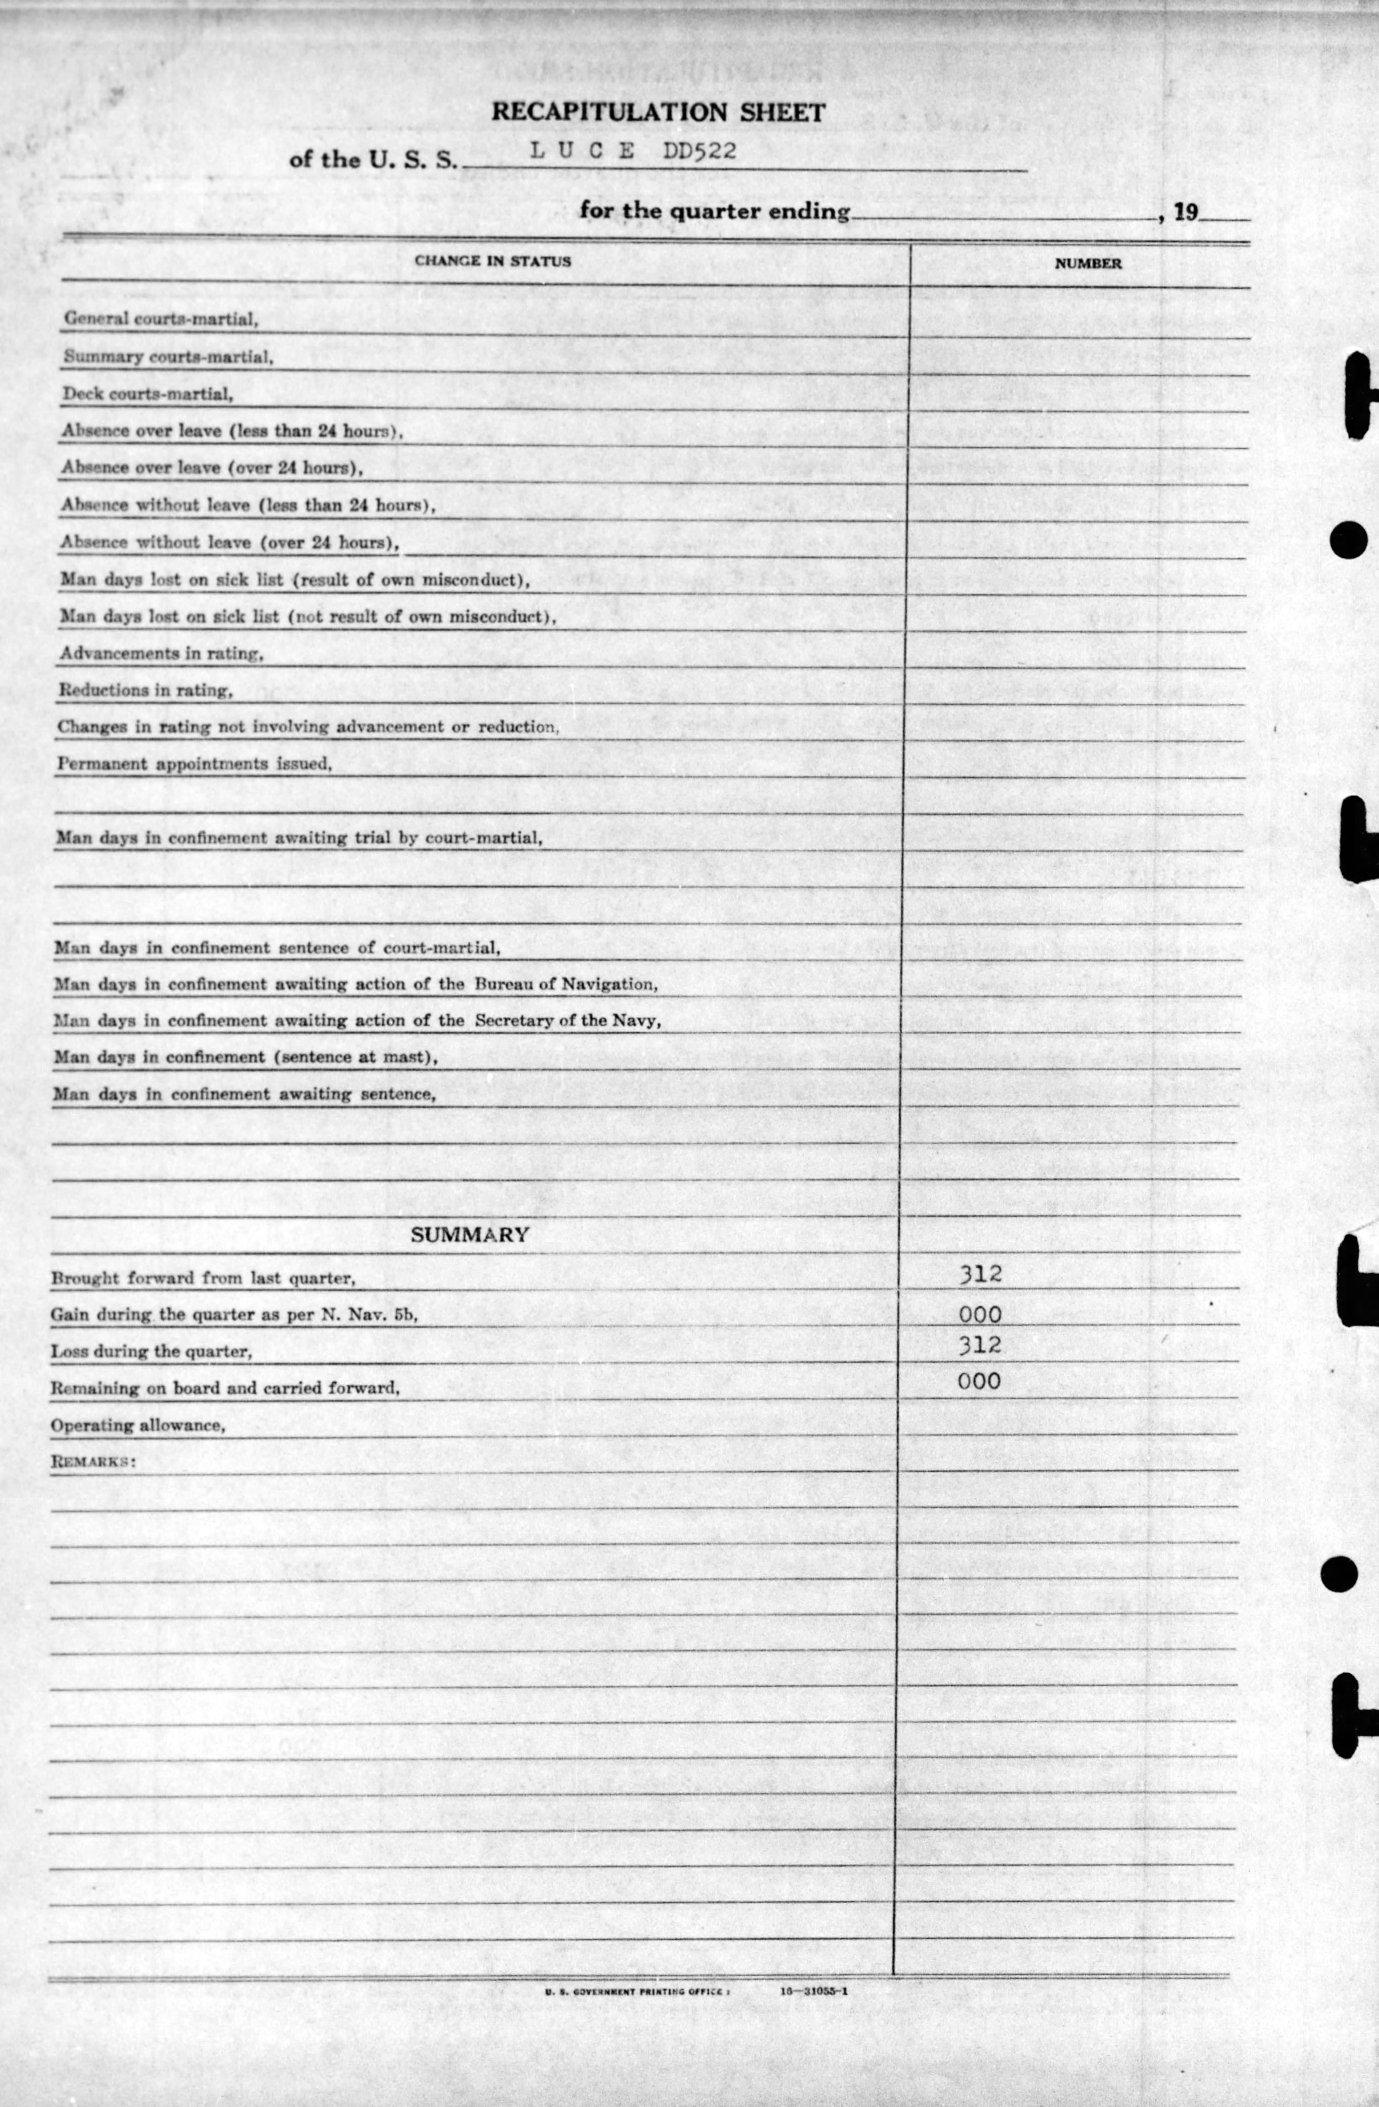 USS Luce final muster list dated June 19, 1945 after the ship was sunk May 4, 1945. Page 25 of 25.